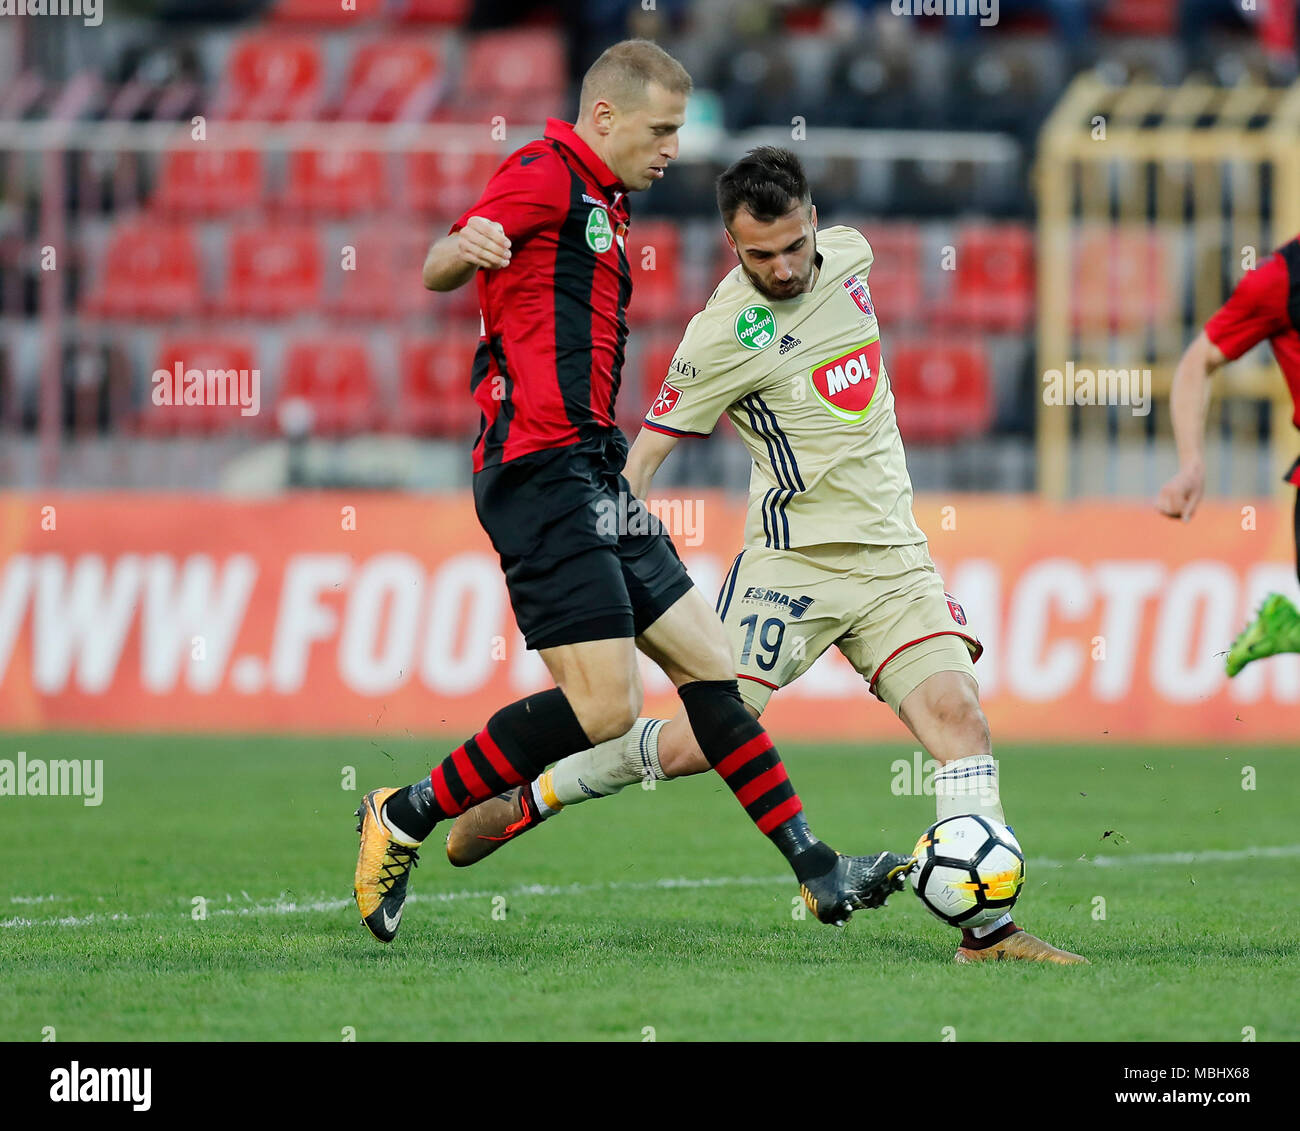 BUDAPEST, HUNGARY - APRIL 11: (l-r) Djordje Kamber of Budapest Honved competes for the ball with Boban Nikolov of Videoton FC during the Hungarian OTP Bank Liga match between Budapest Honved and Videoton FC at Bozsik Stadium on April 11, 2018 in Budapest, Hungary. Stock Photo